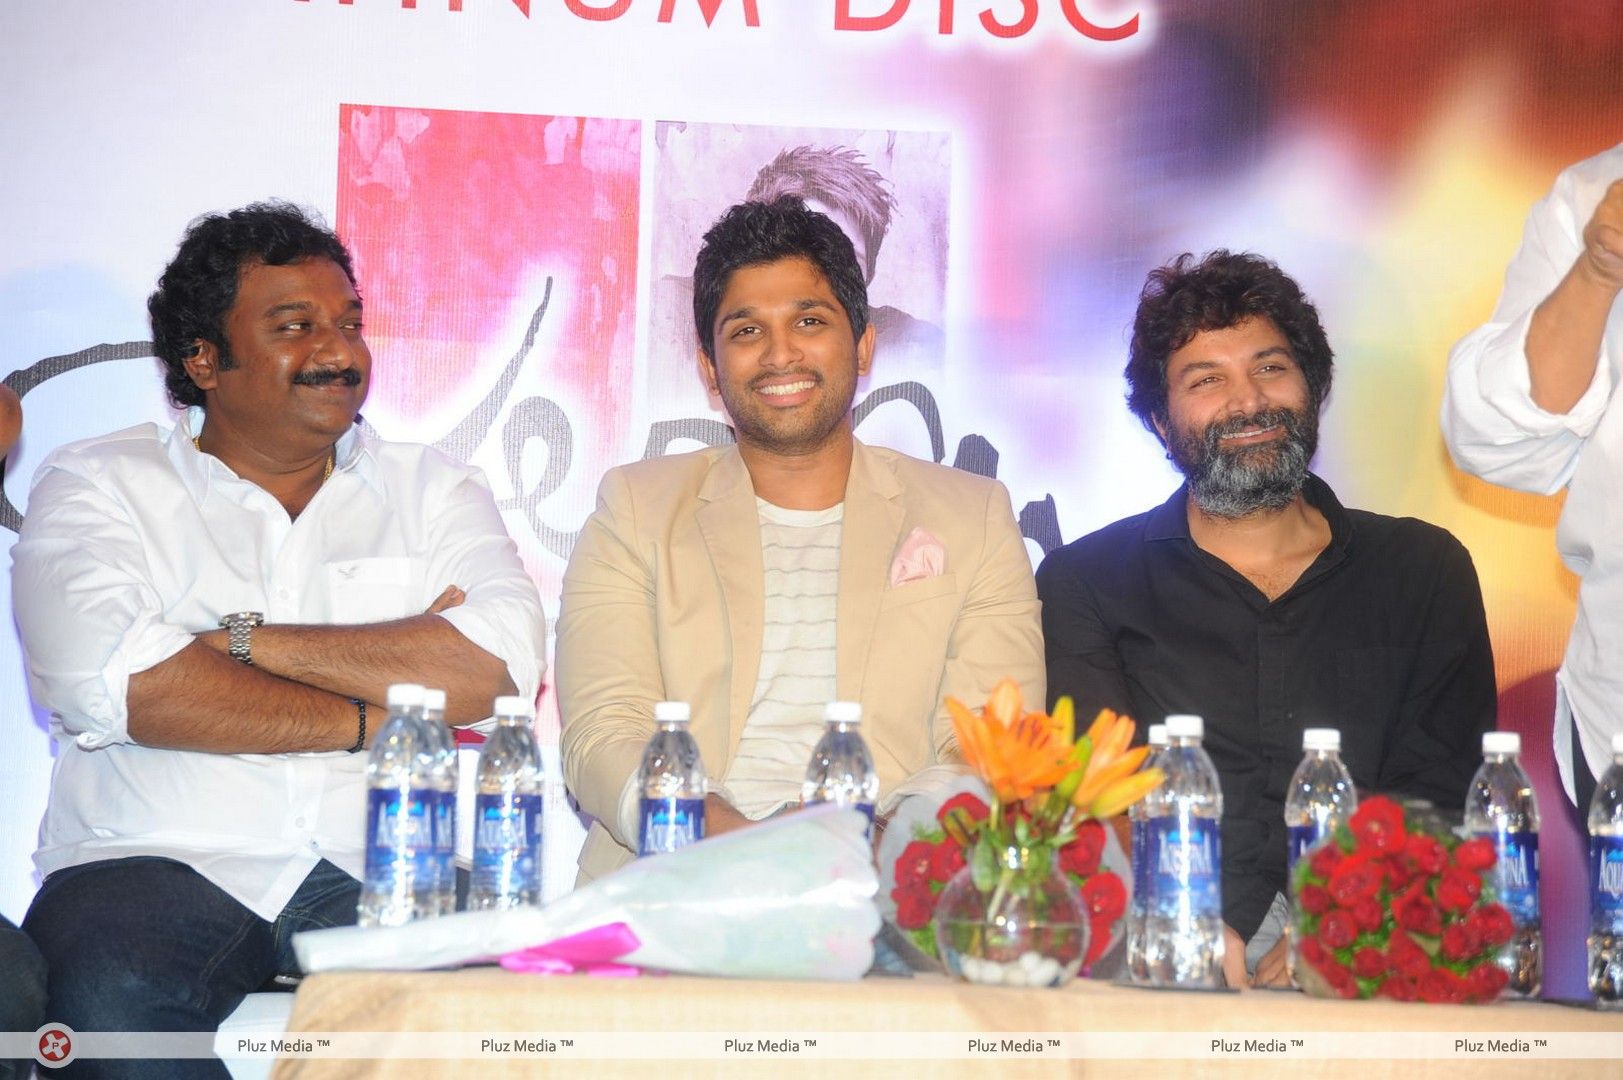 Julayi Double Platinum Disc Function Pictures | Picture 253713